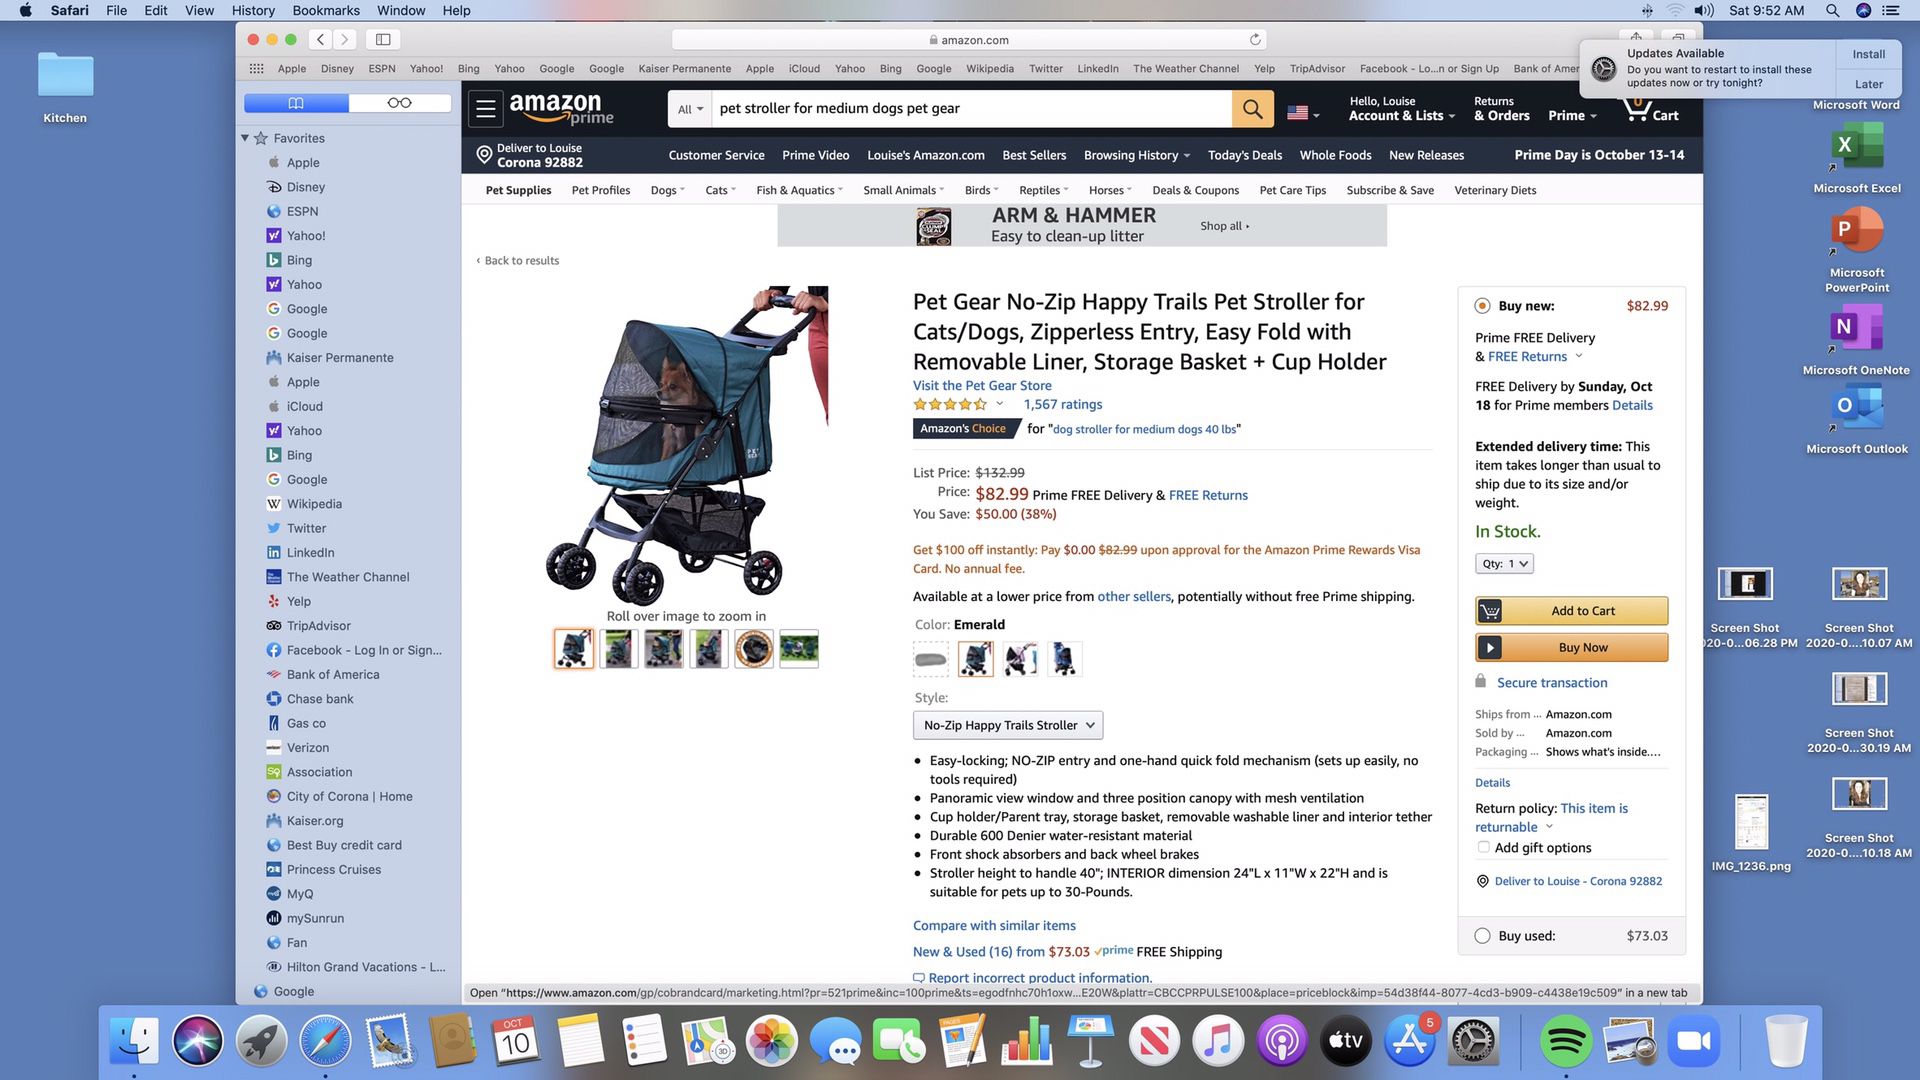 Pet stroller and cushion